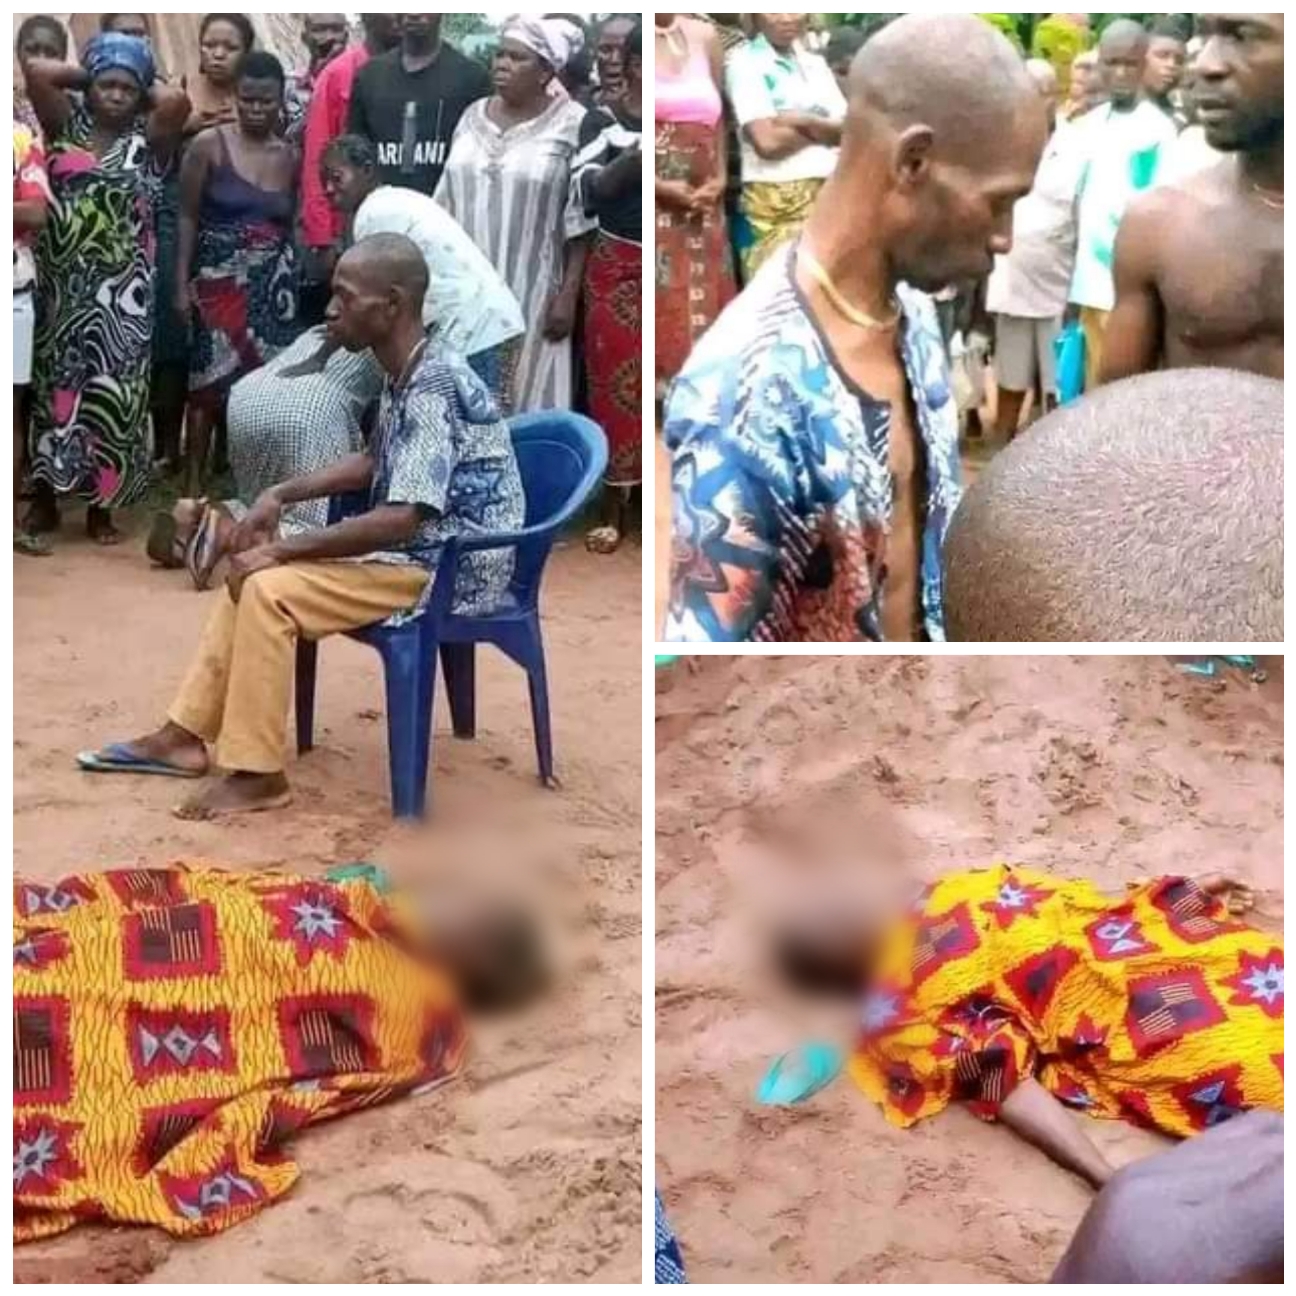 Man allegedly stabs his wife to d@ath over misunderstanding in Benue community